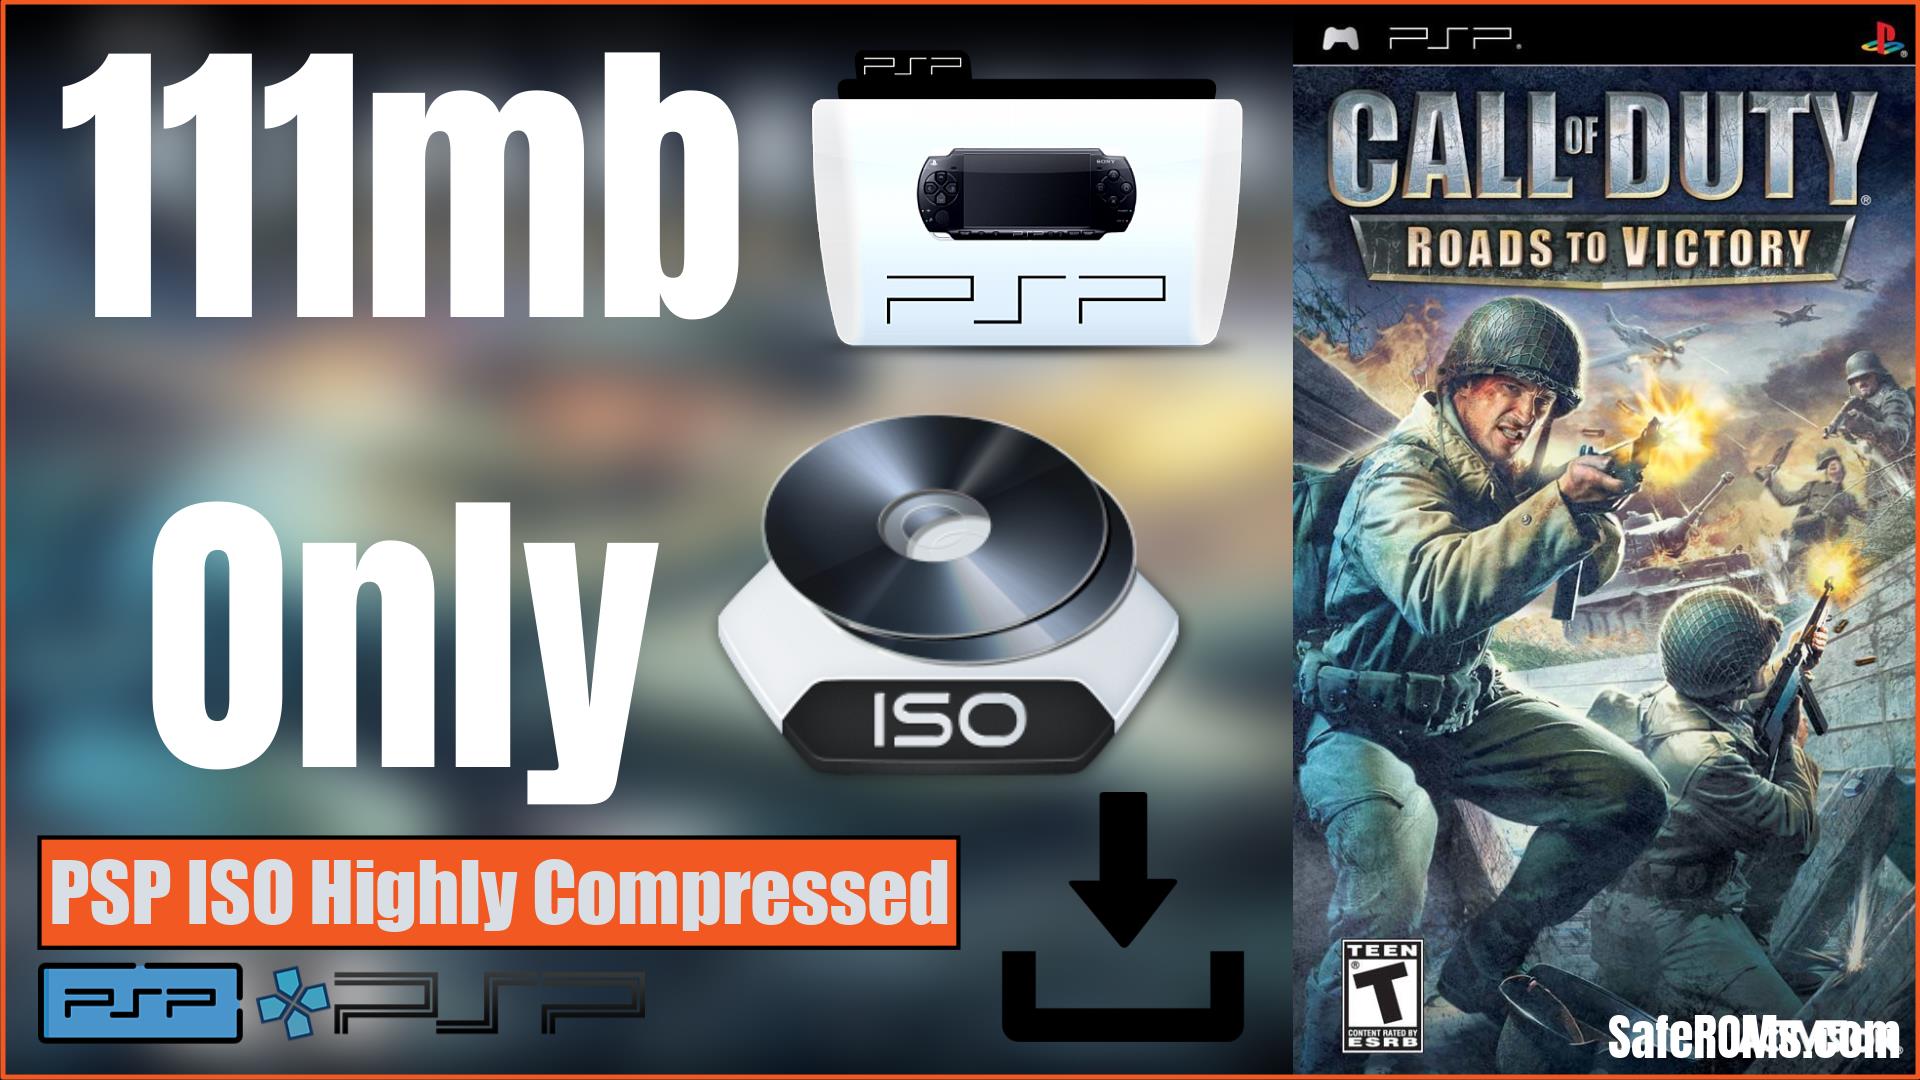 Call of Duty Roads to Victory PSP ISO Highly Compressed